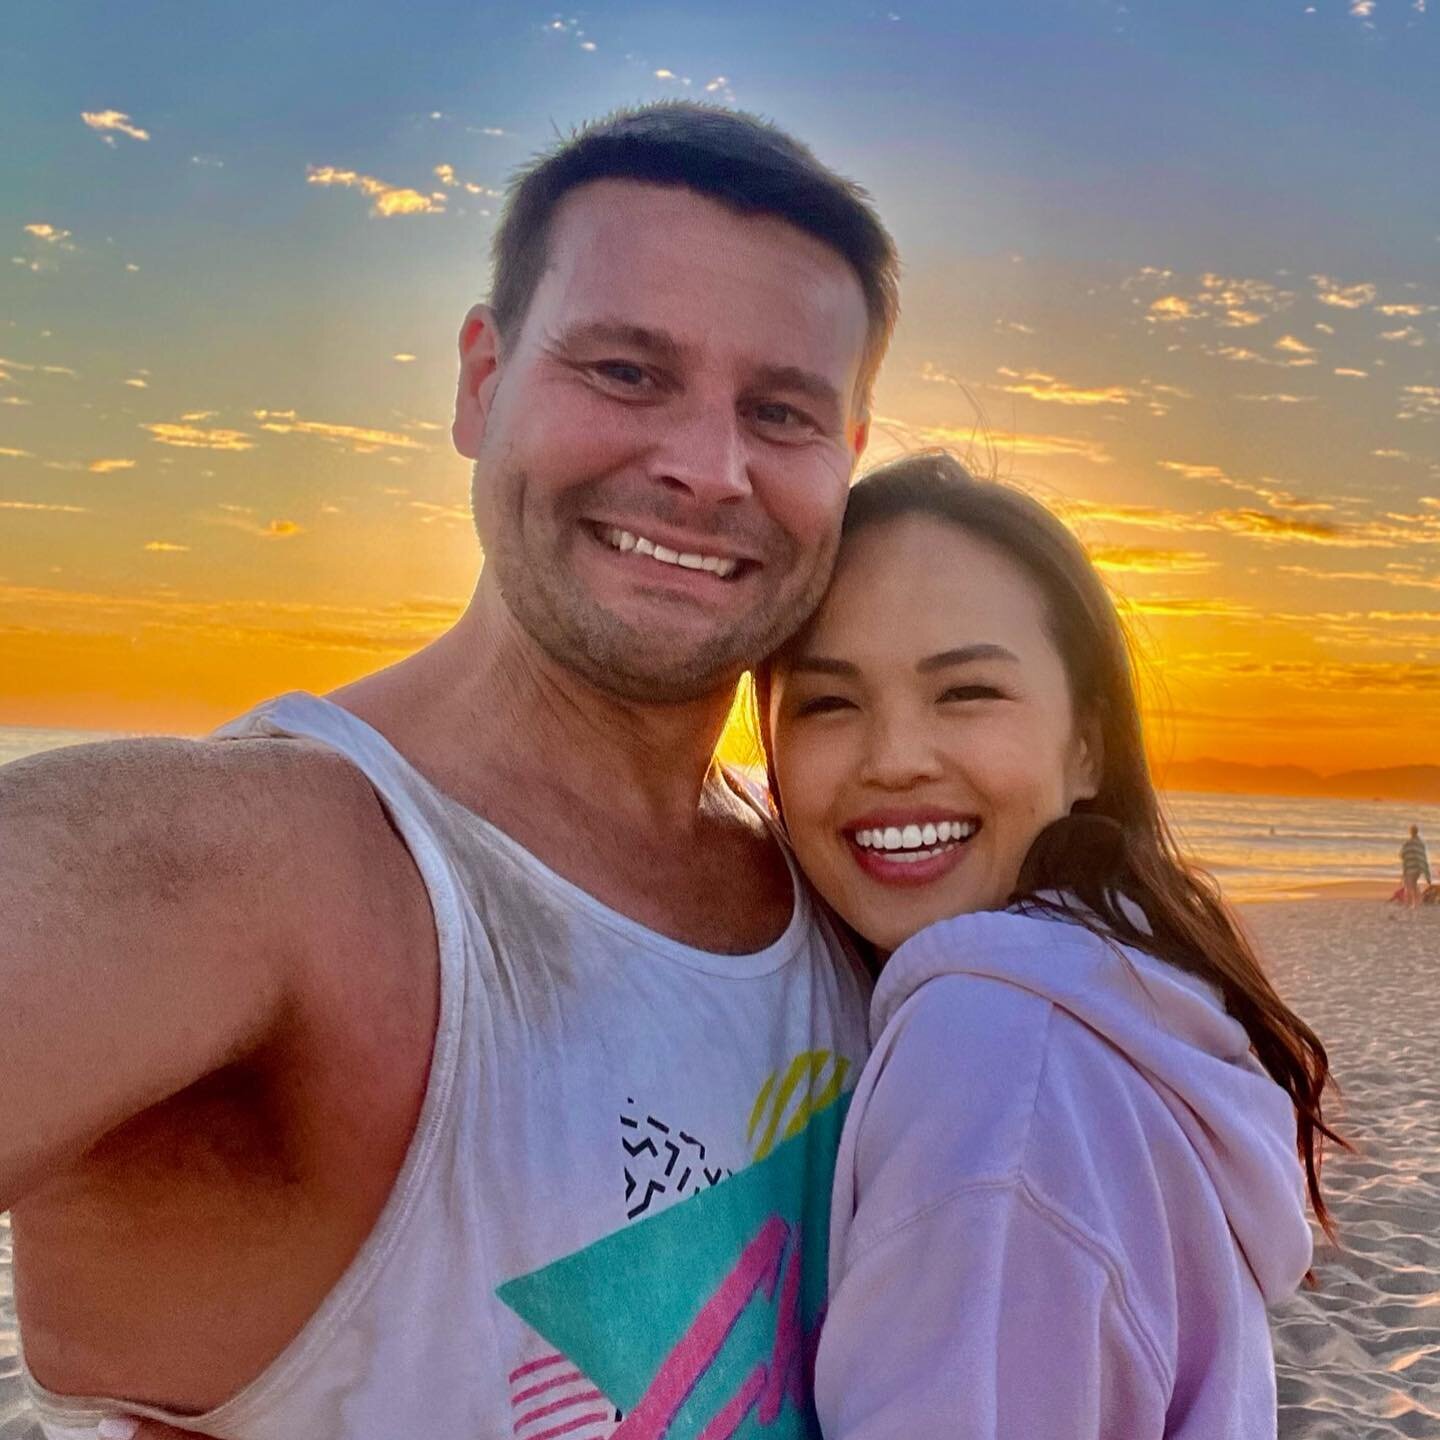 Nothing beats the beach life with your babe! And these beautiful sunsets 🌅 😍